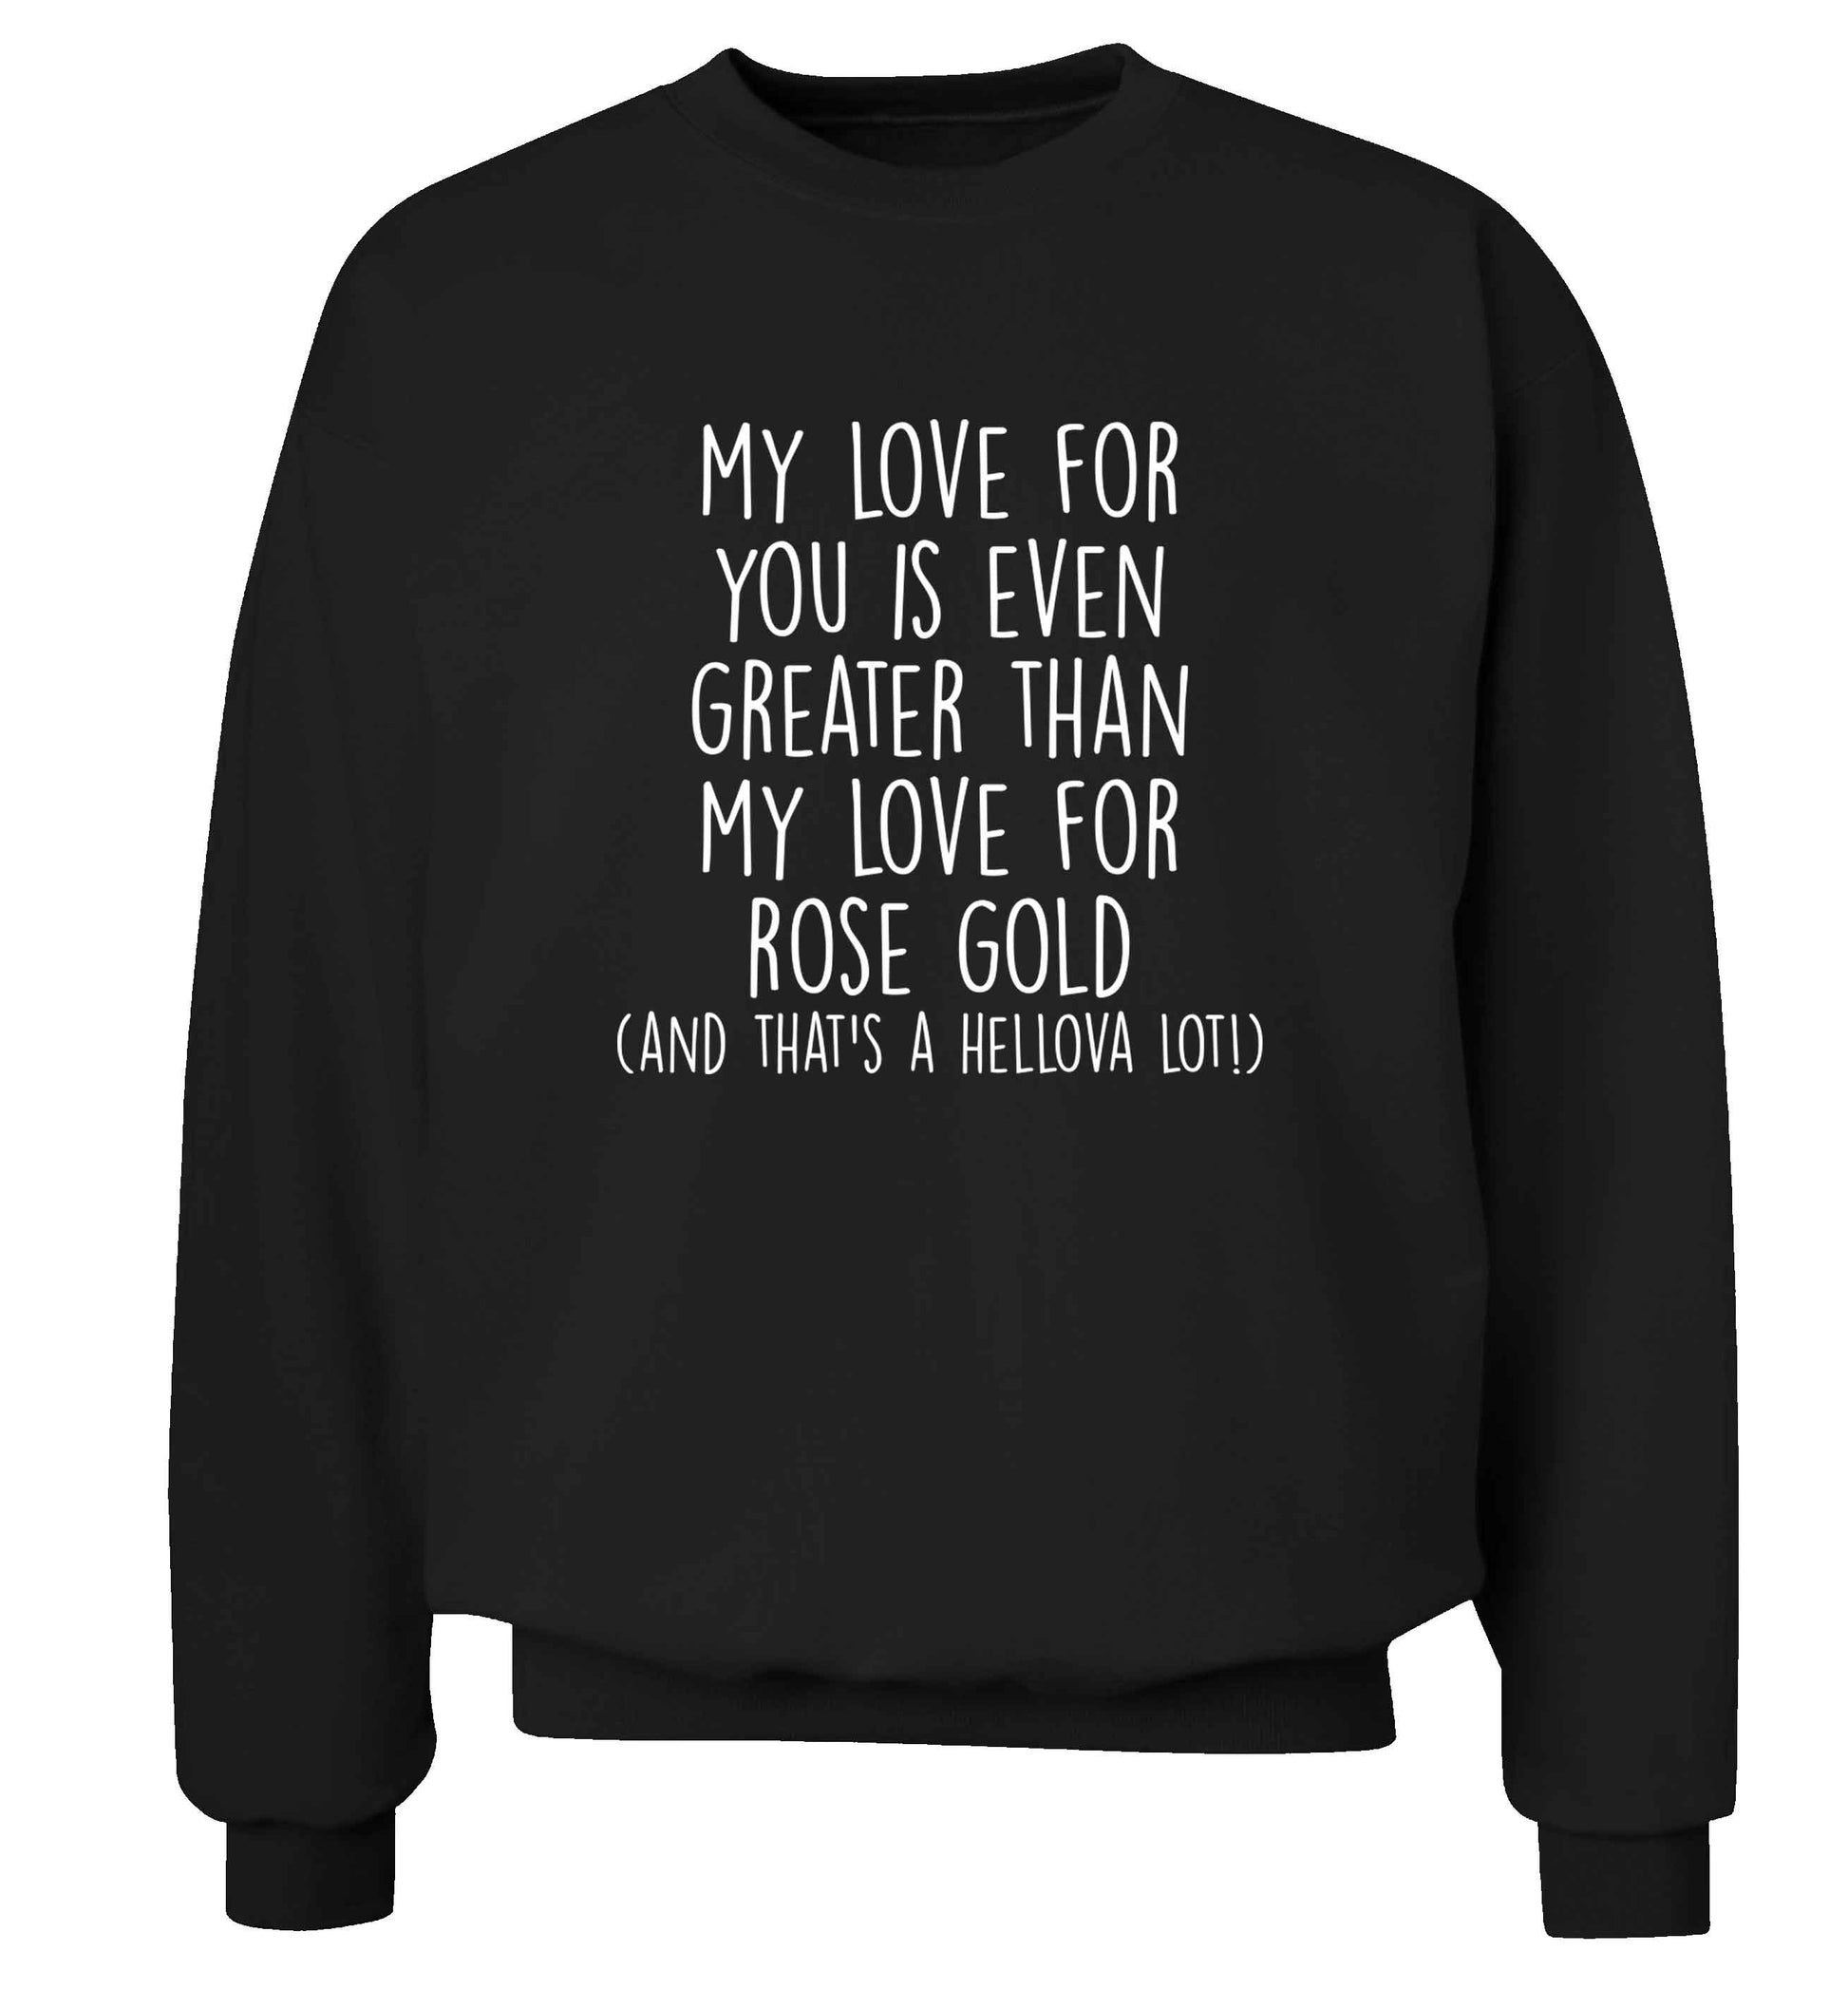 My love for you is even greater than my love for rose gold (and that's a hellova lot) adult's unisex black sweater 2XL